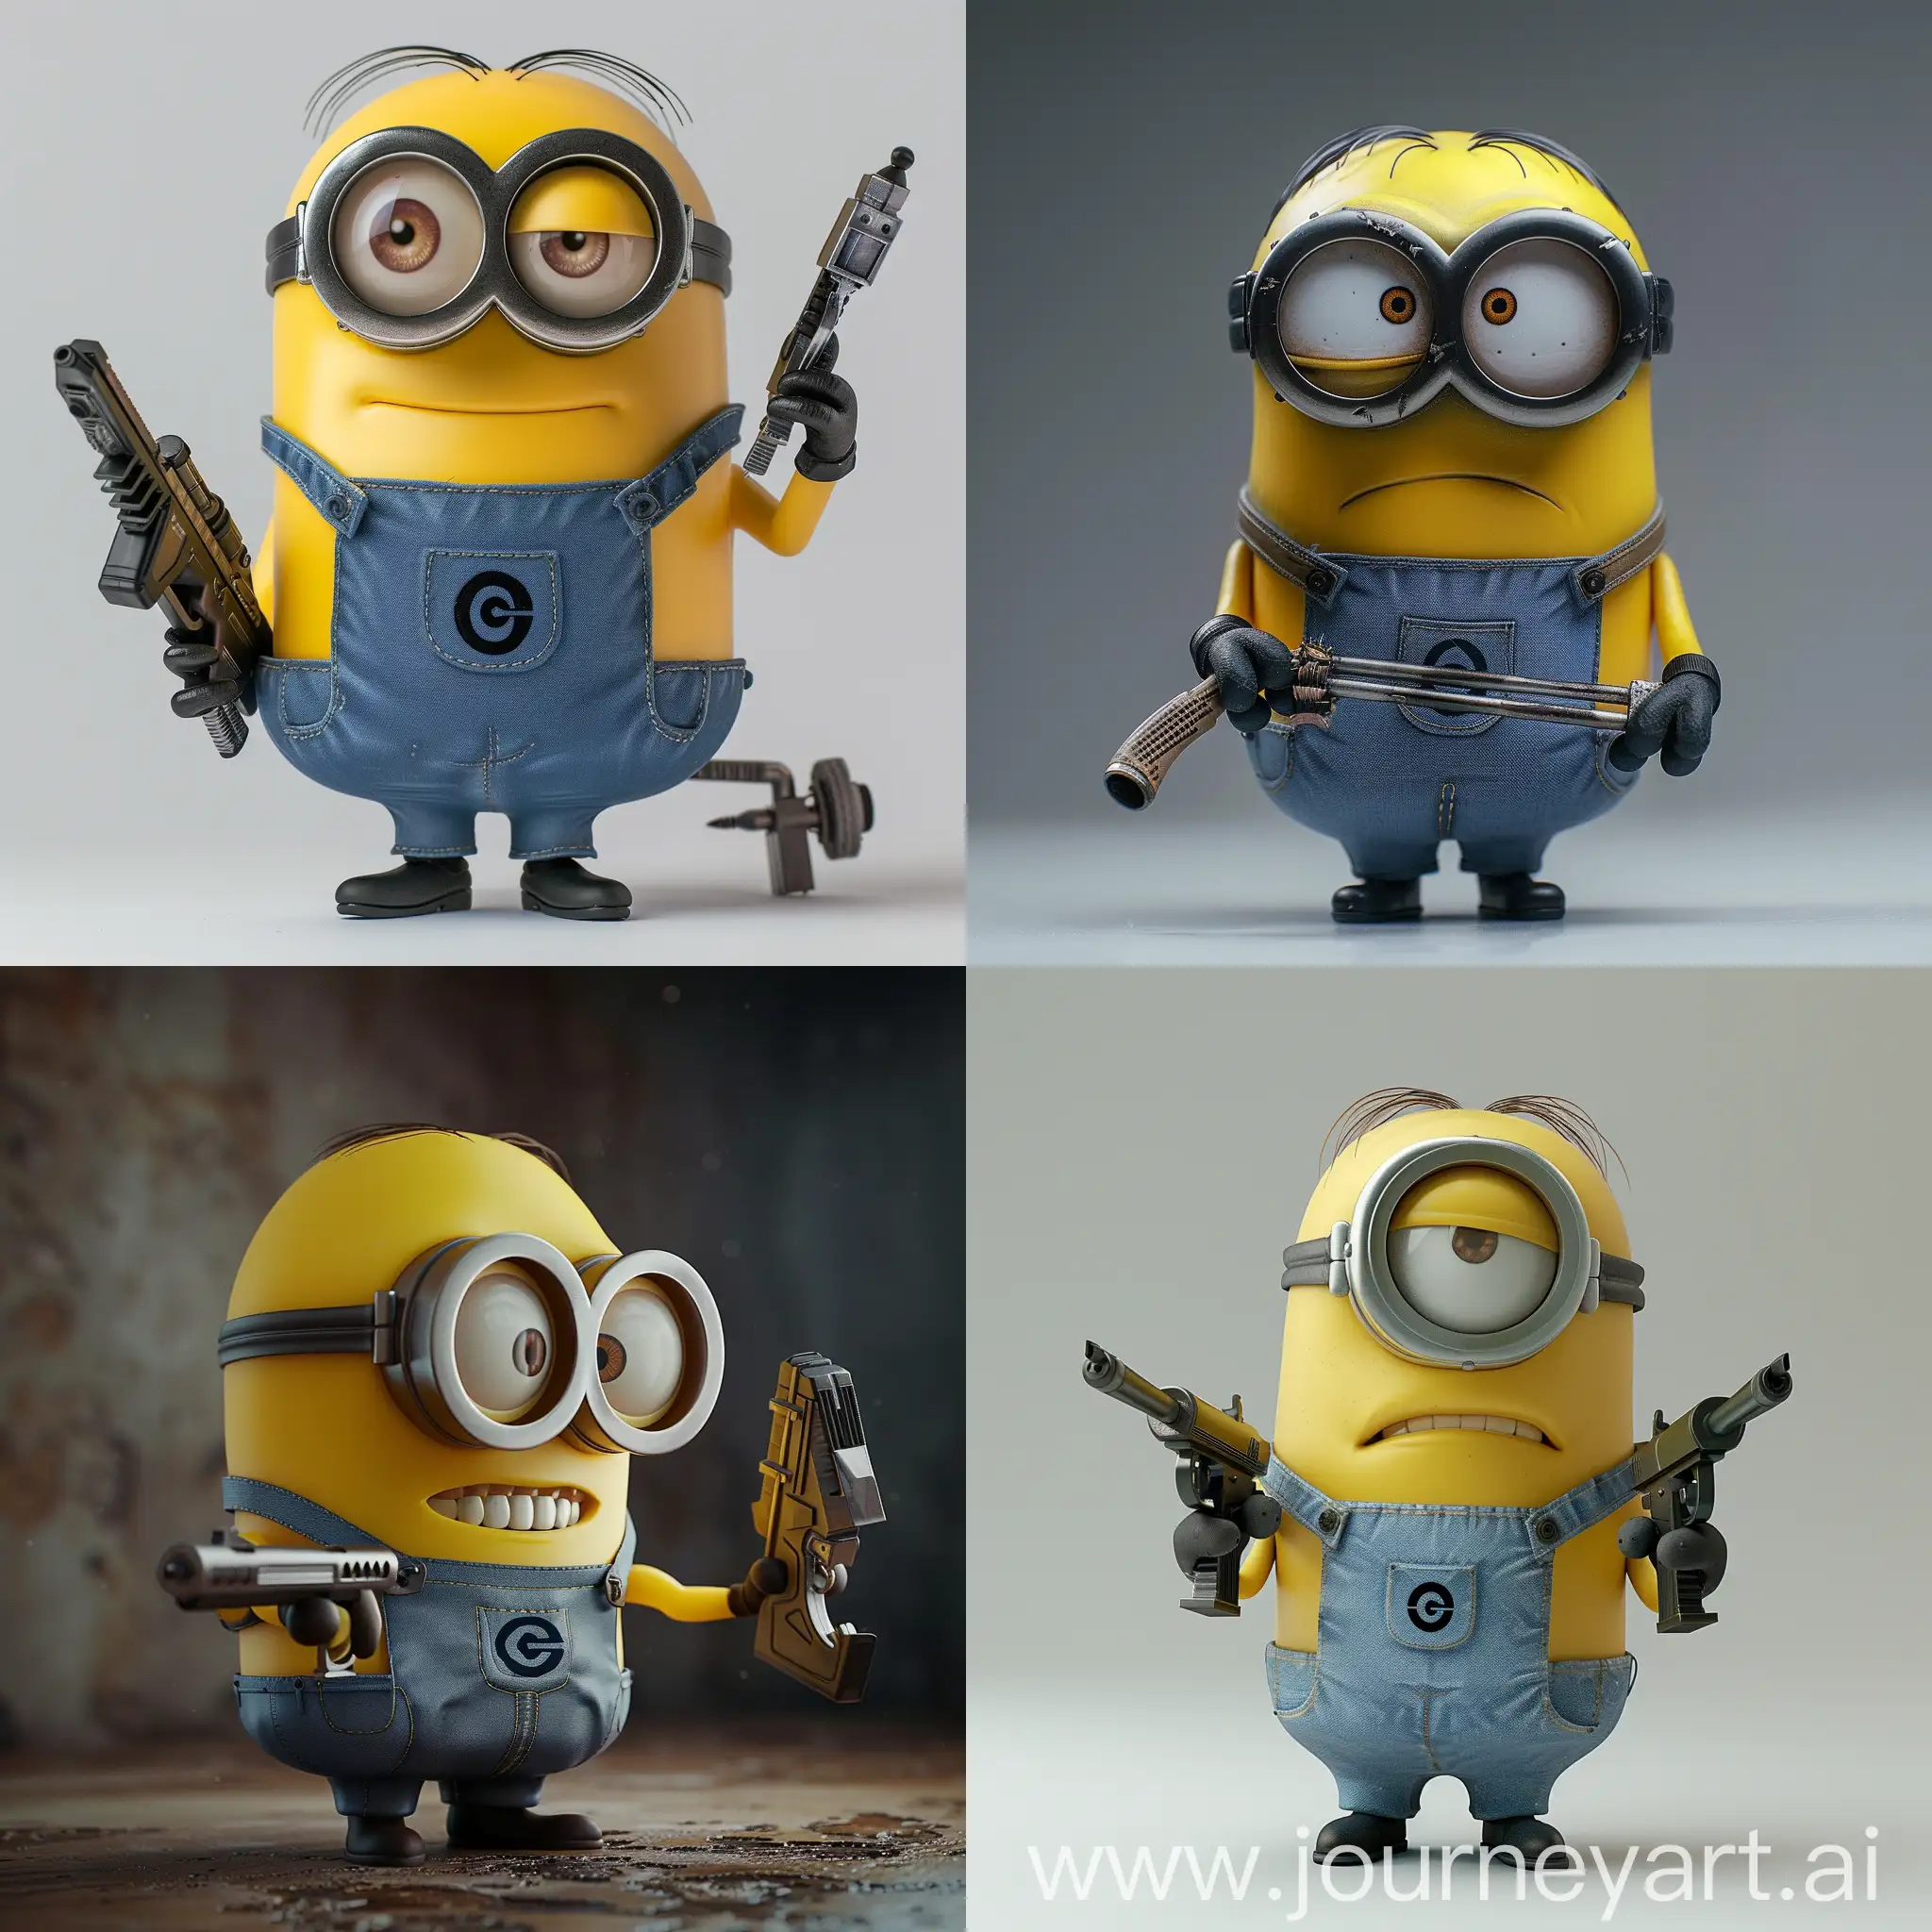 Pumped-Up-Minion-with-Weapon-ActionPacked-Warrior-Minion-Ready-for-Battle